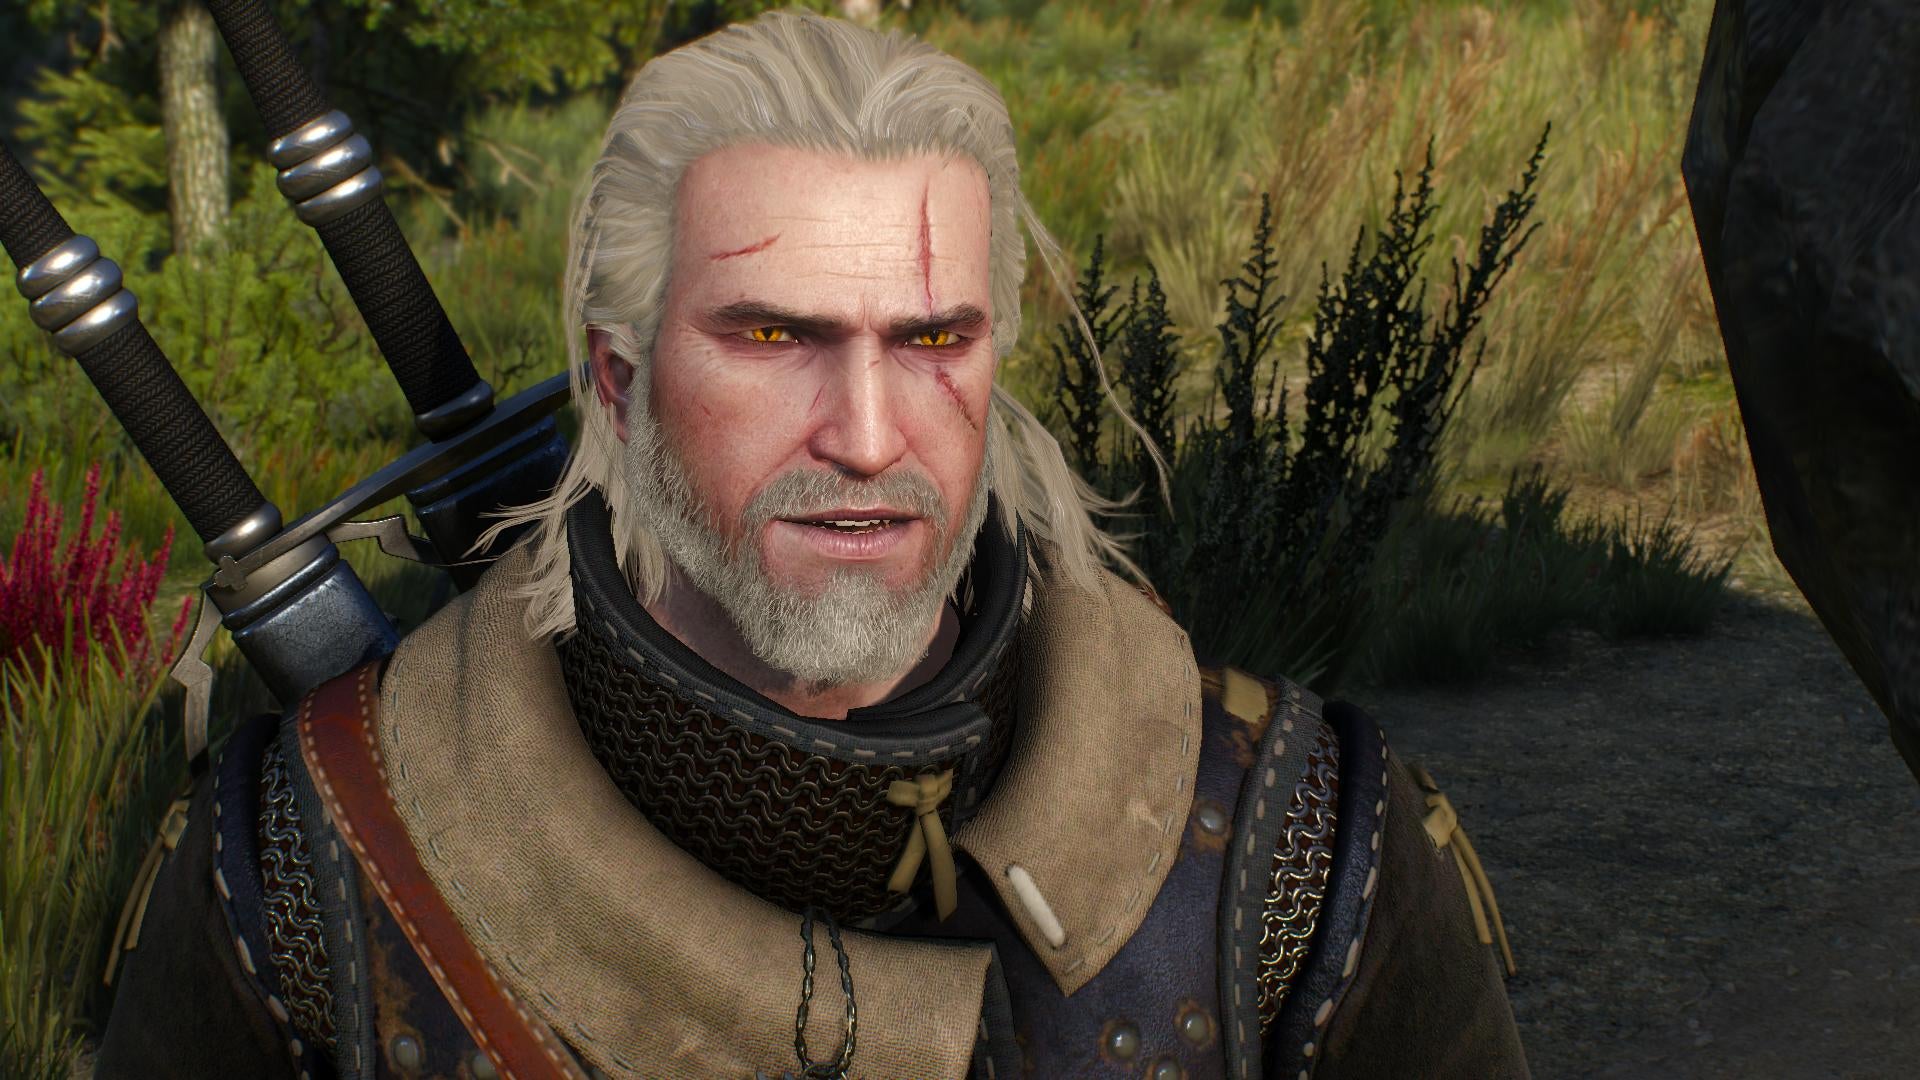 will there be a season 3 of the witcher